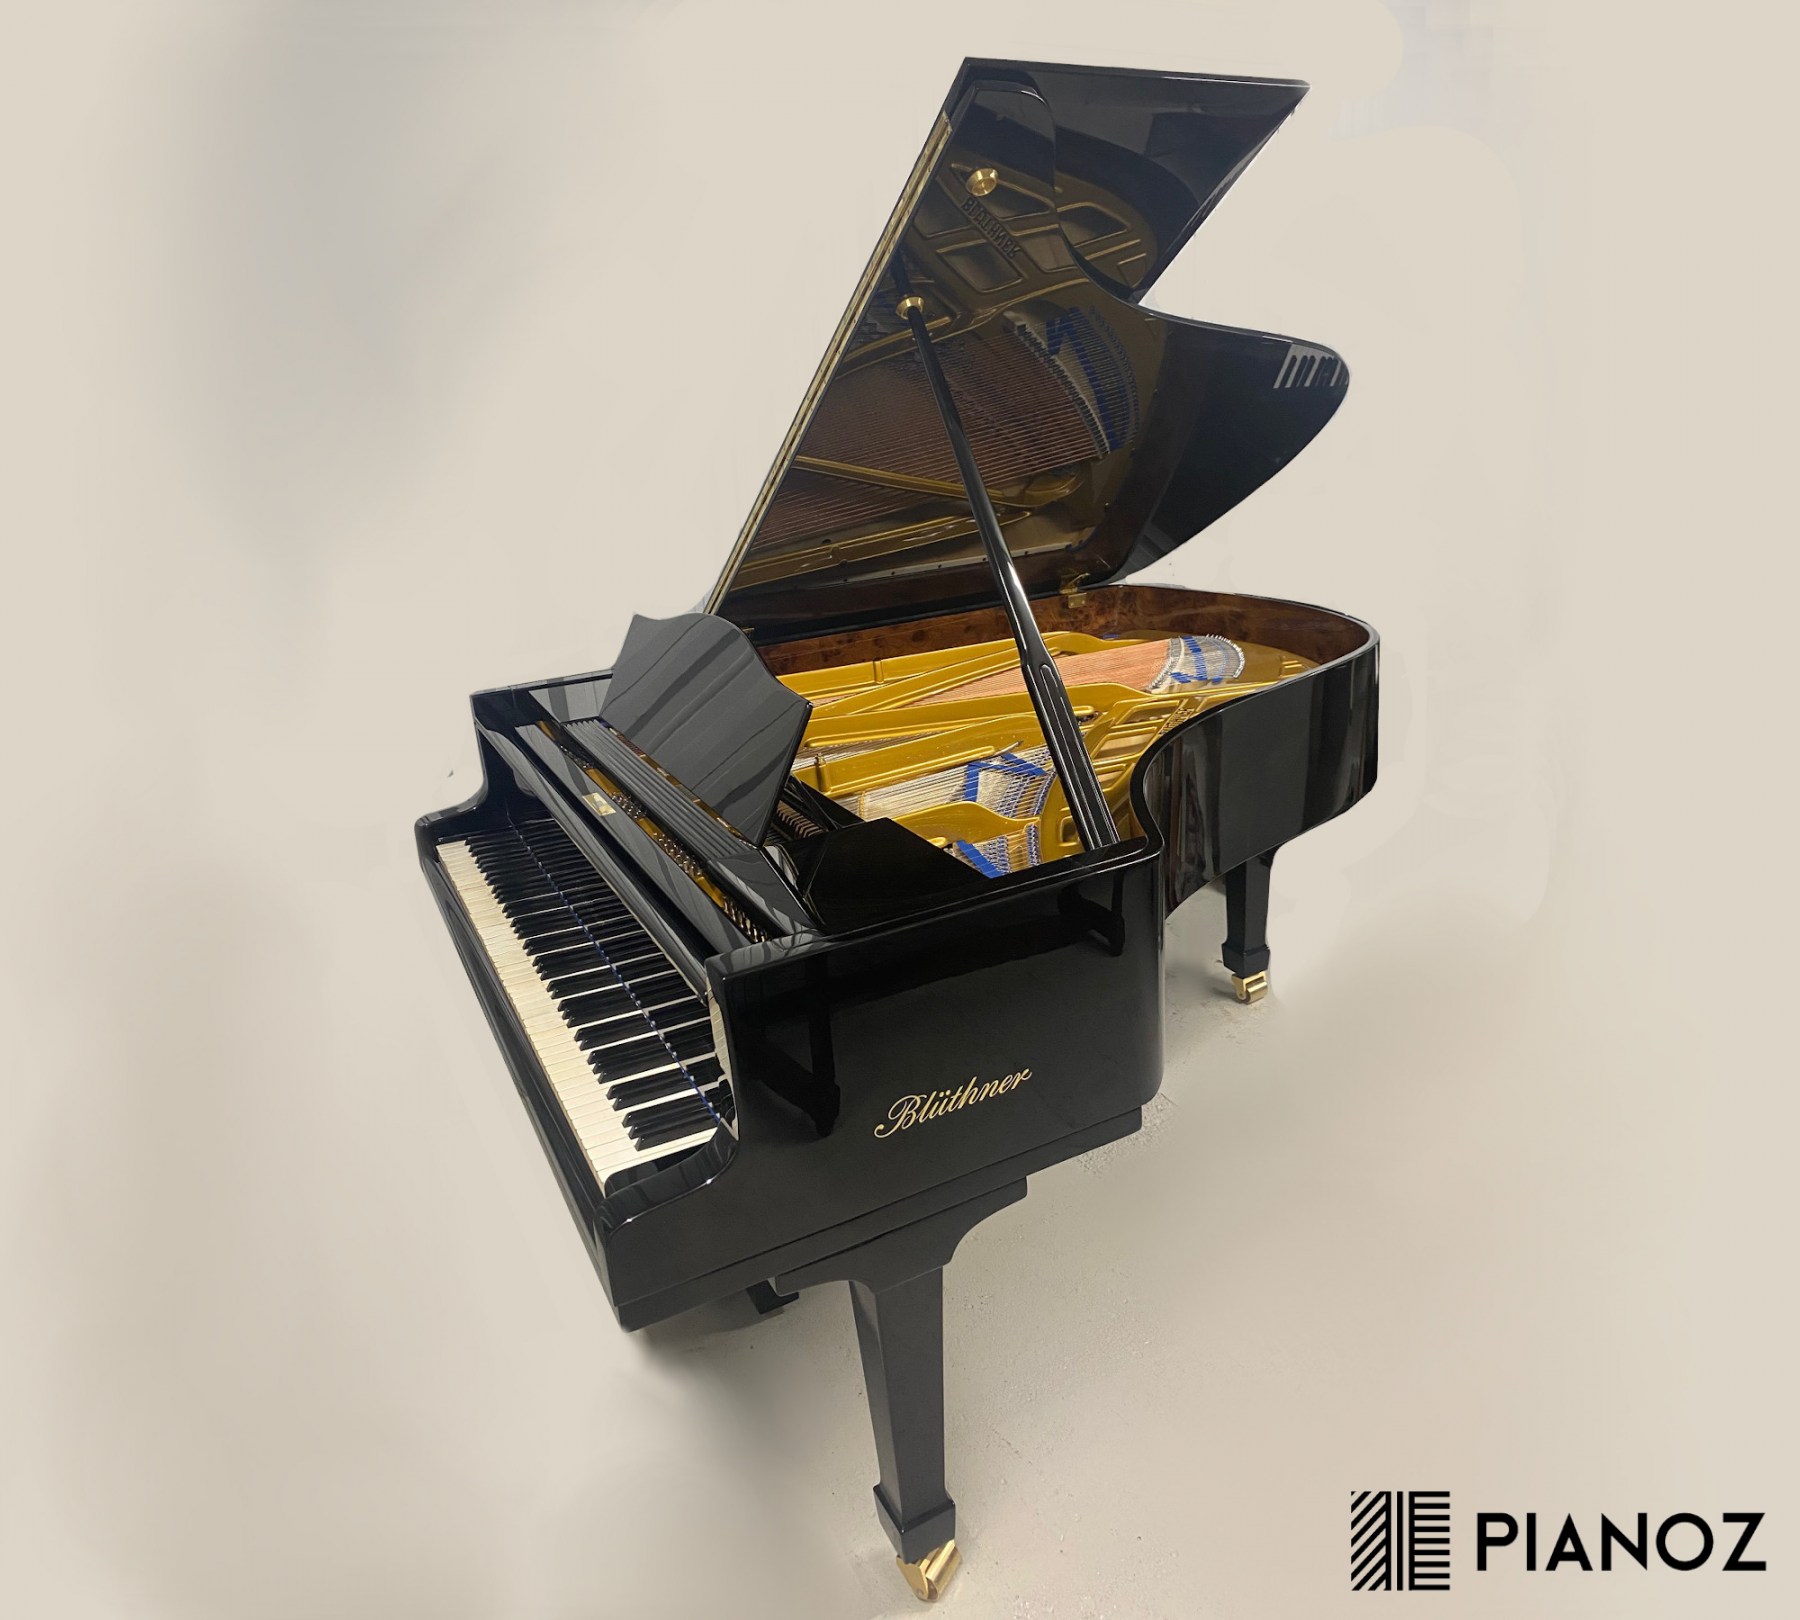 Bluthner  Model 6  Grand Piano piano for sale in UK